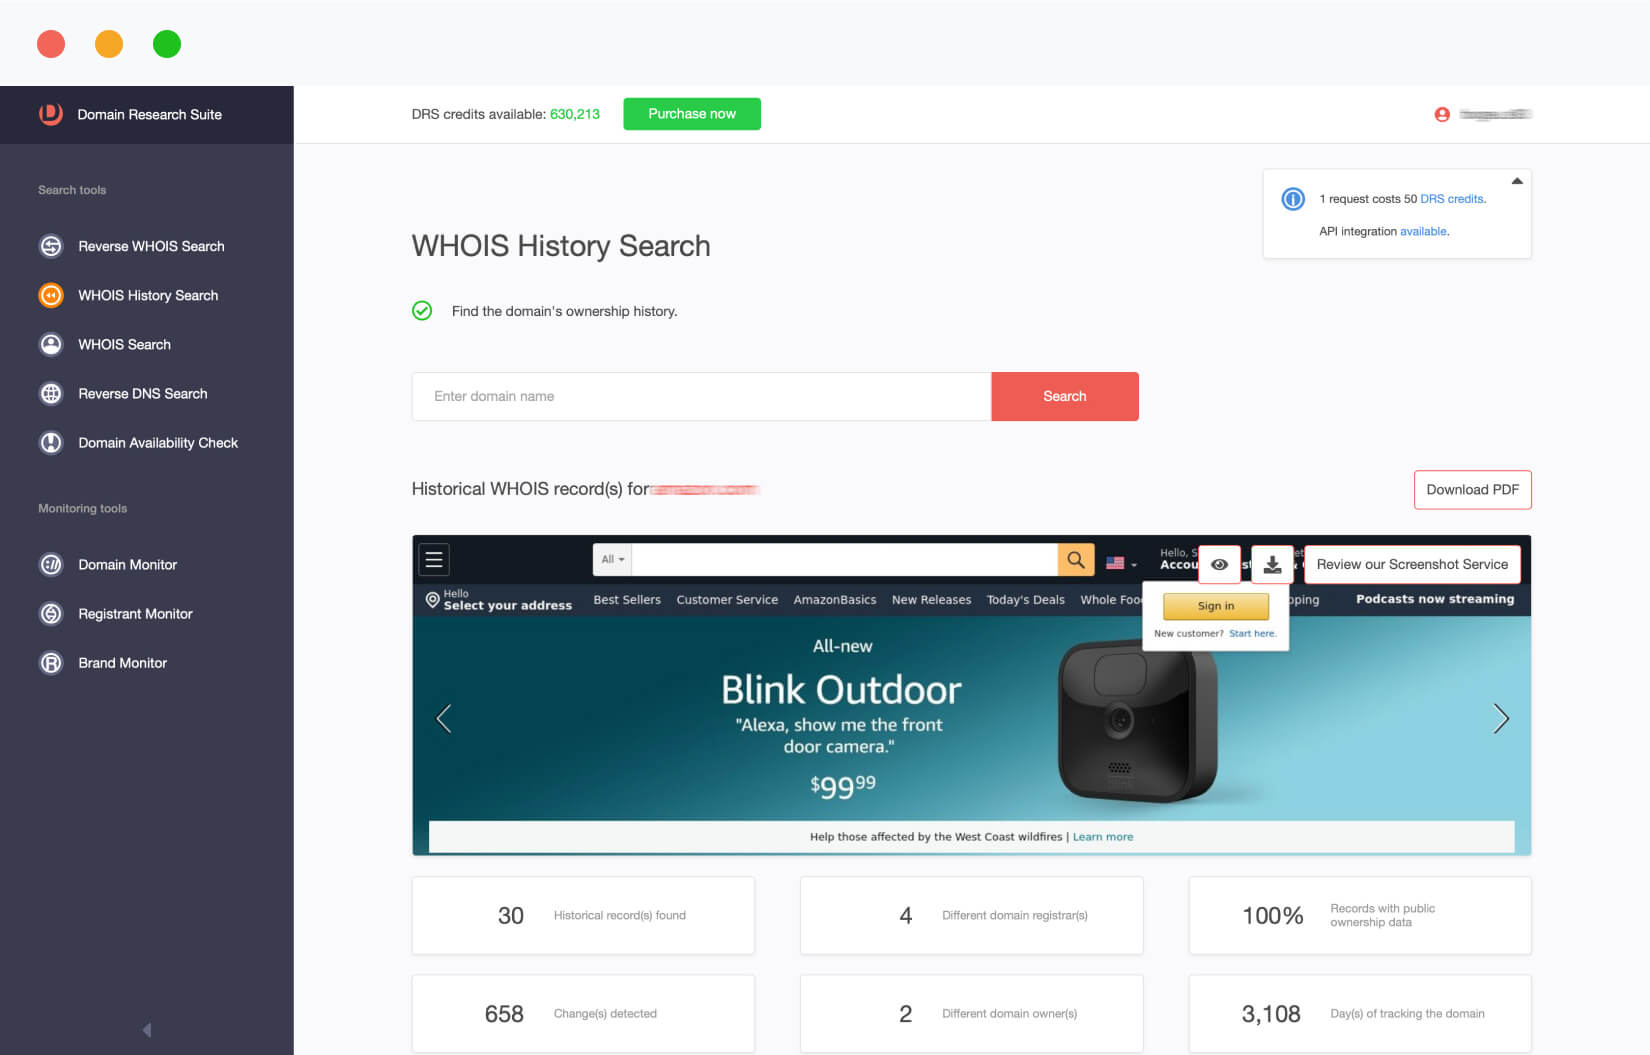 WHOIS History Search